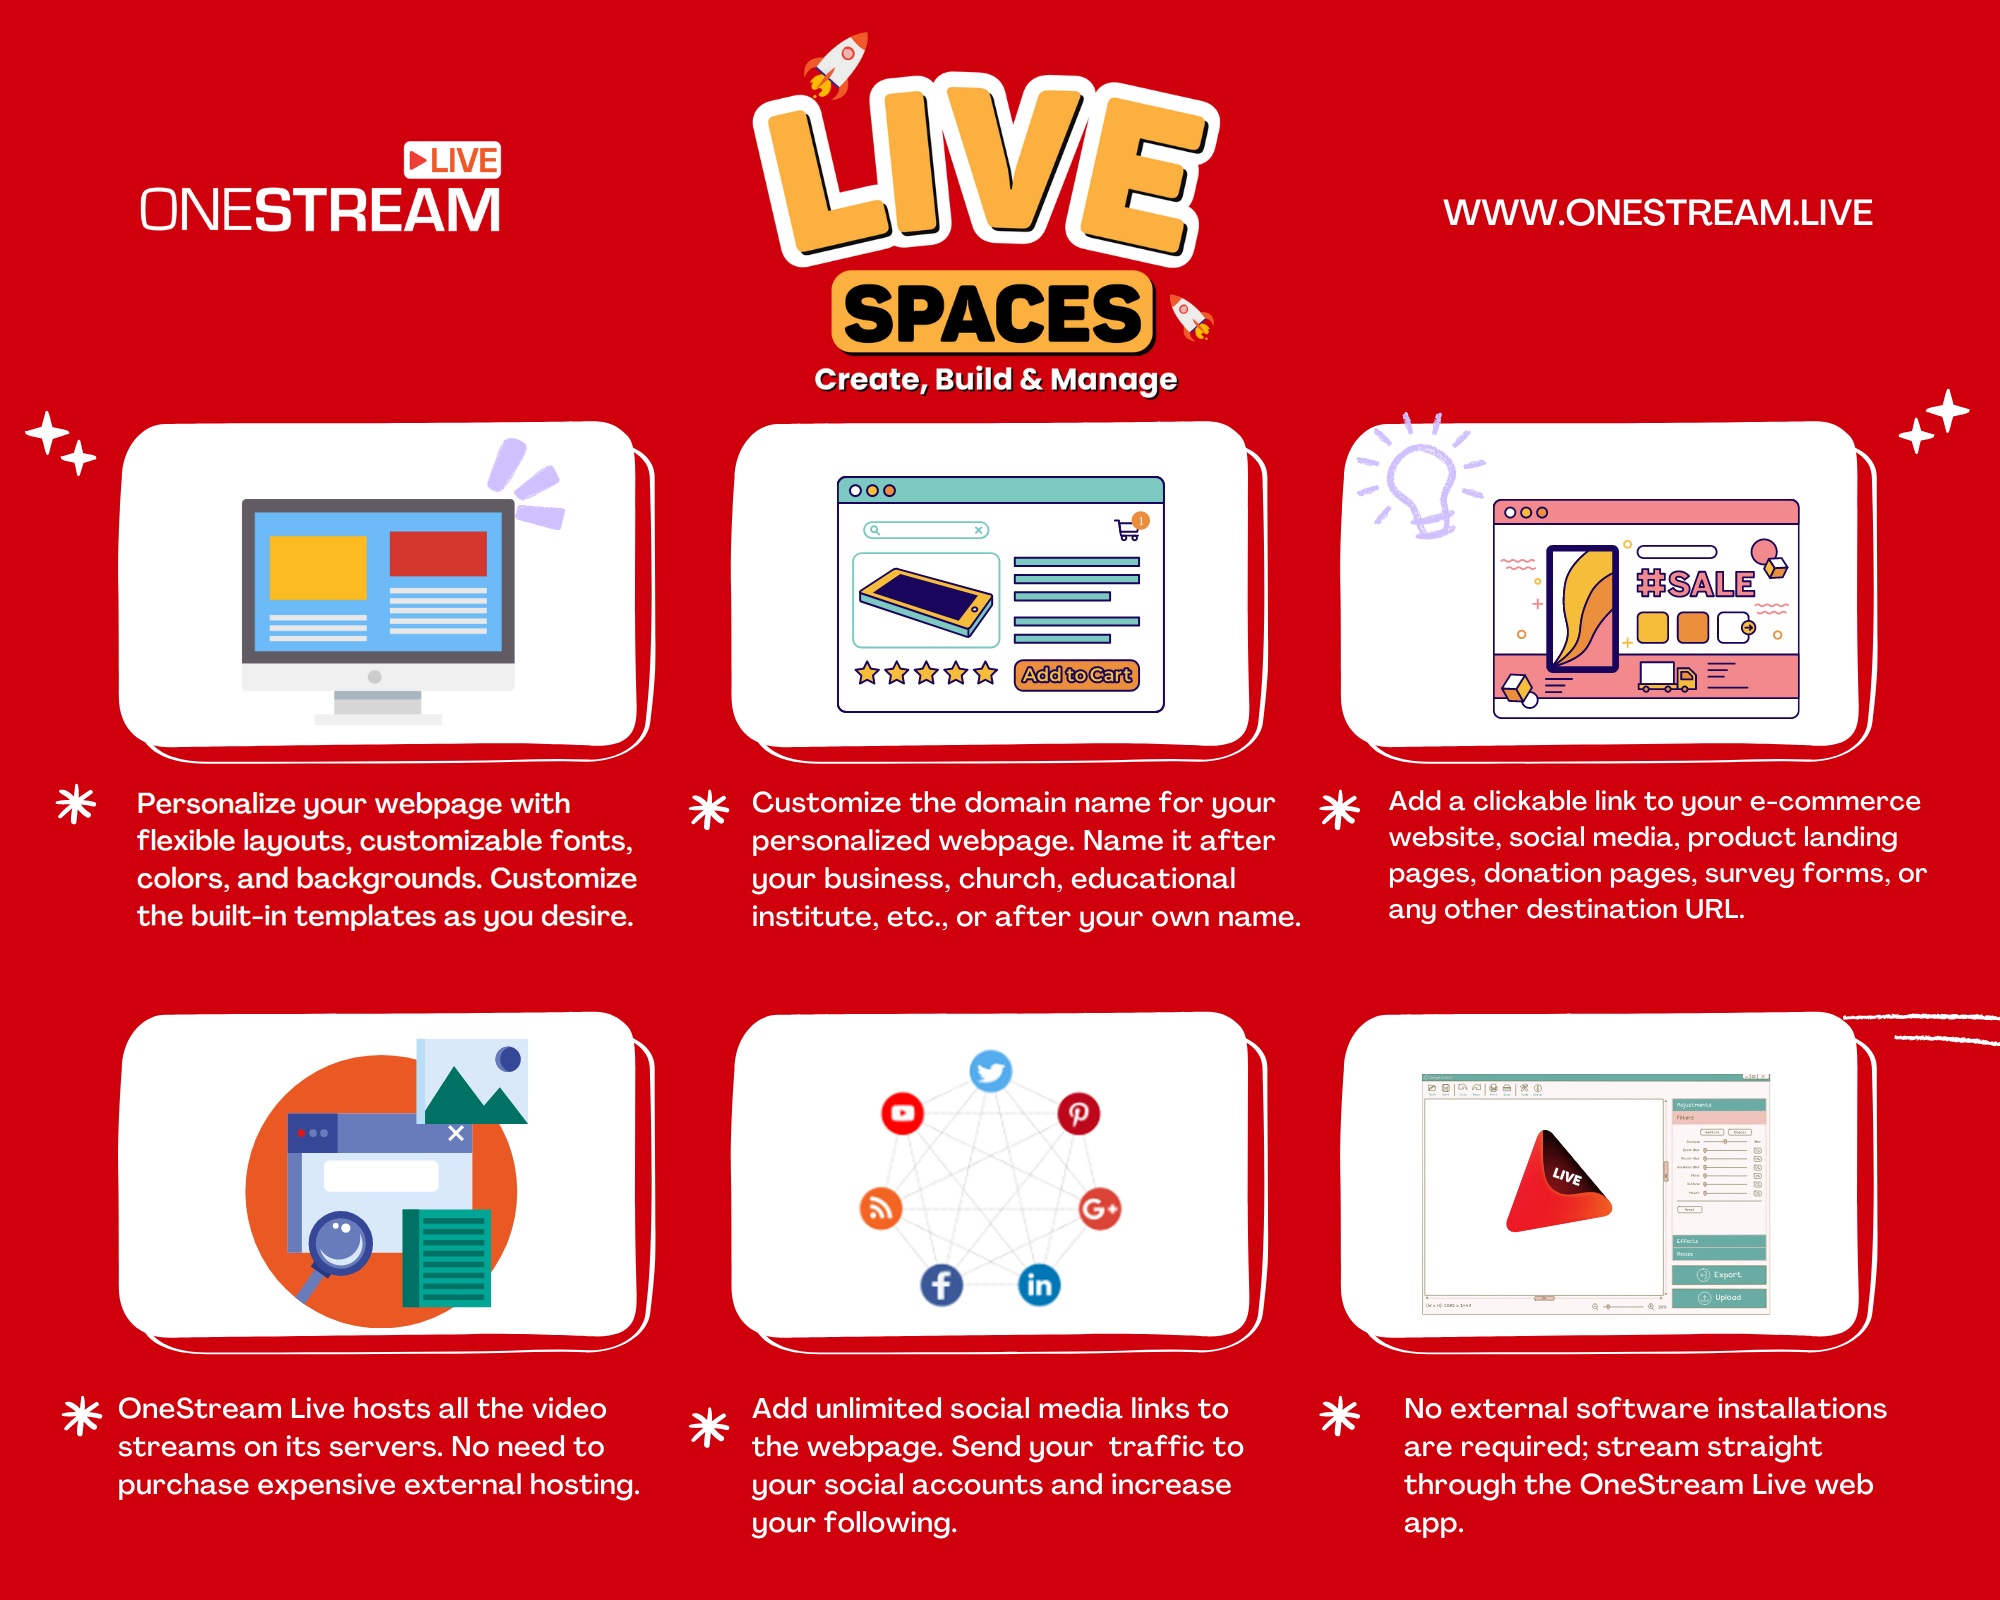 Live stream on personalized webpages via OneStream Live Spaces